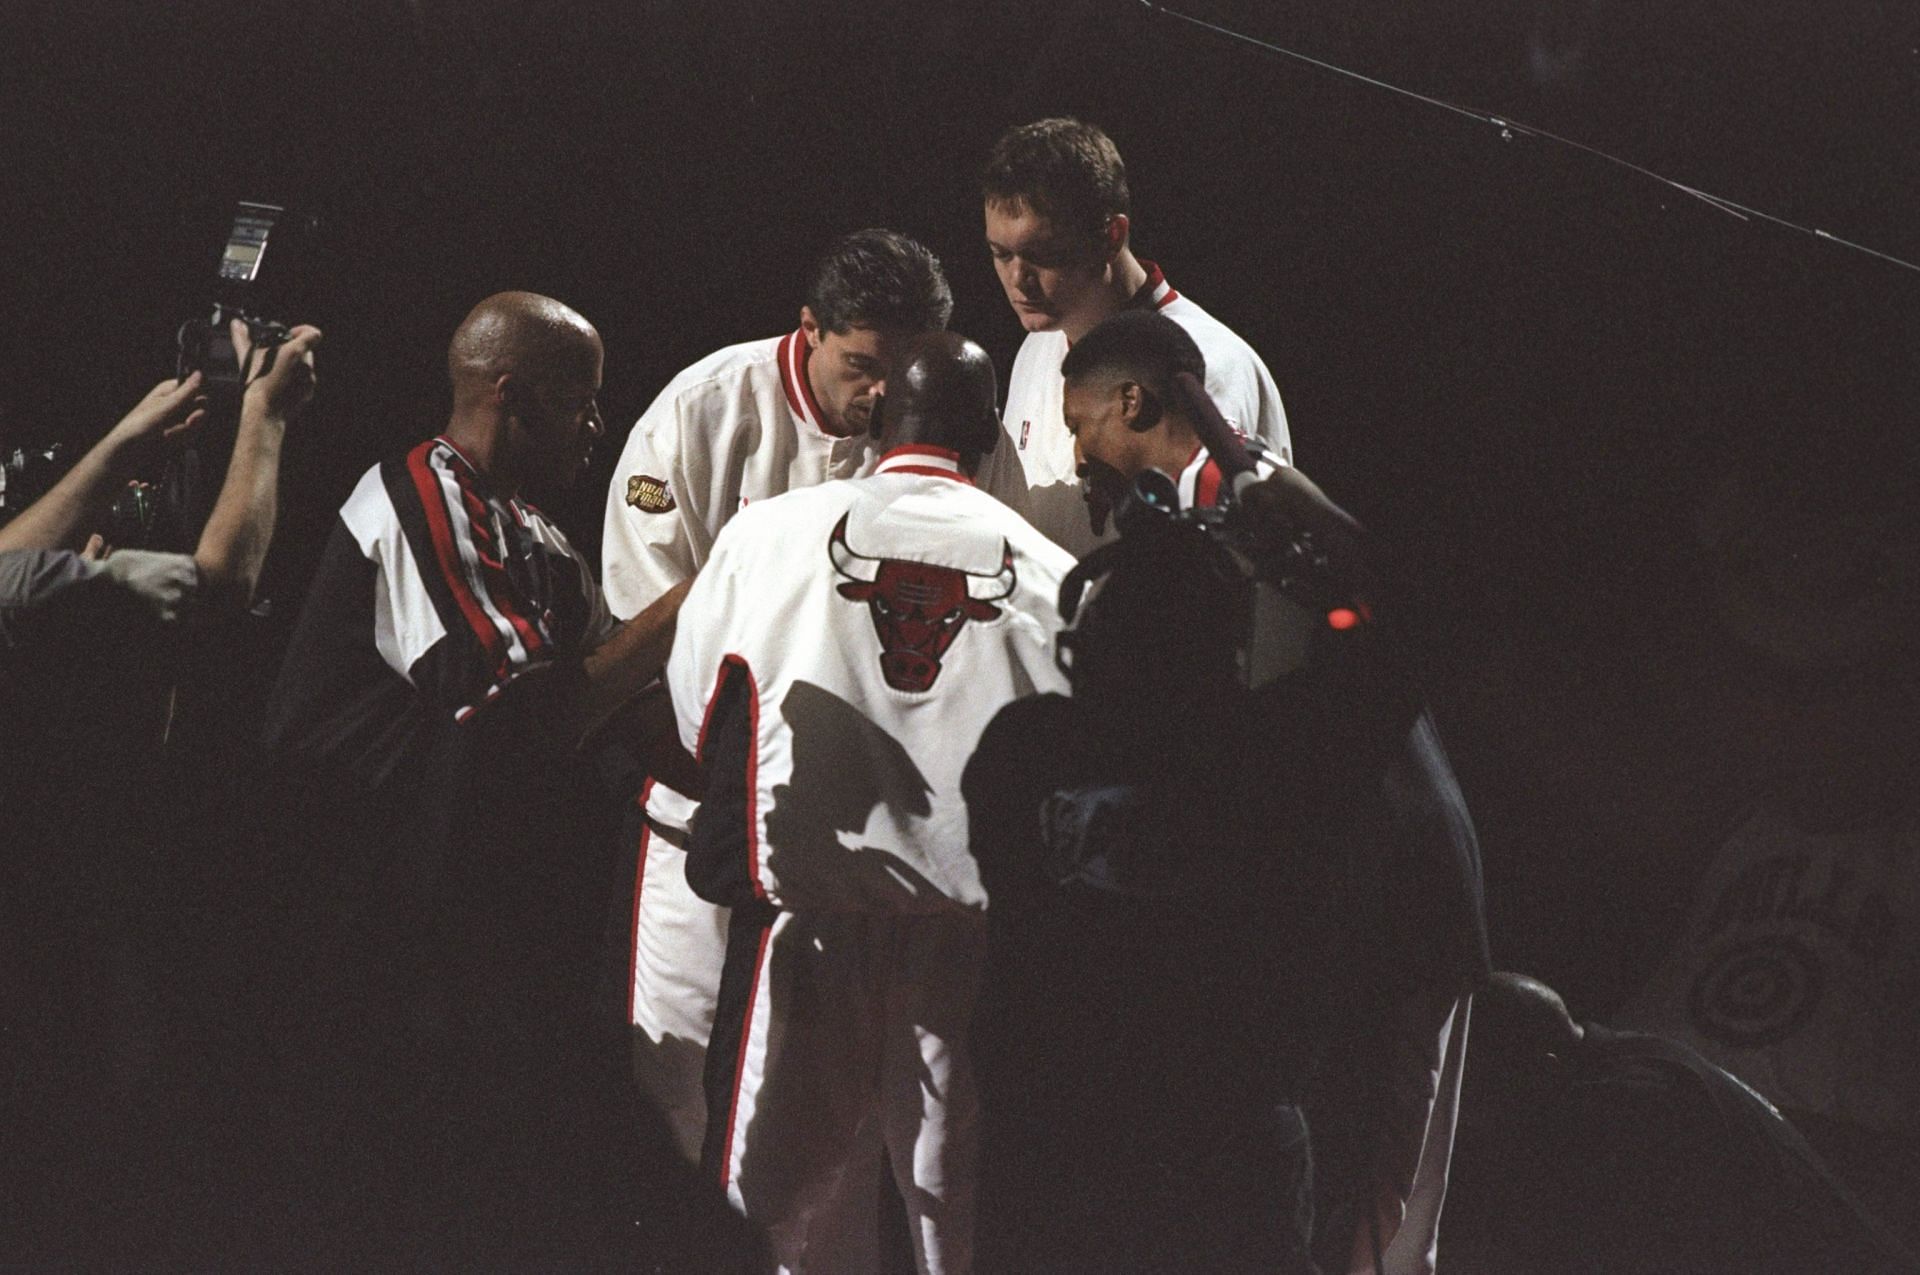 Jordan and the Chicago Bulls ahead of a game in 1998.